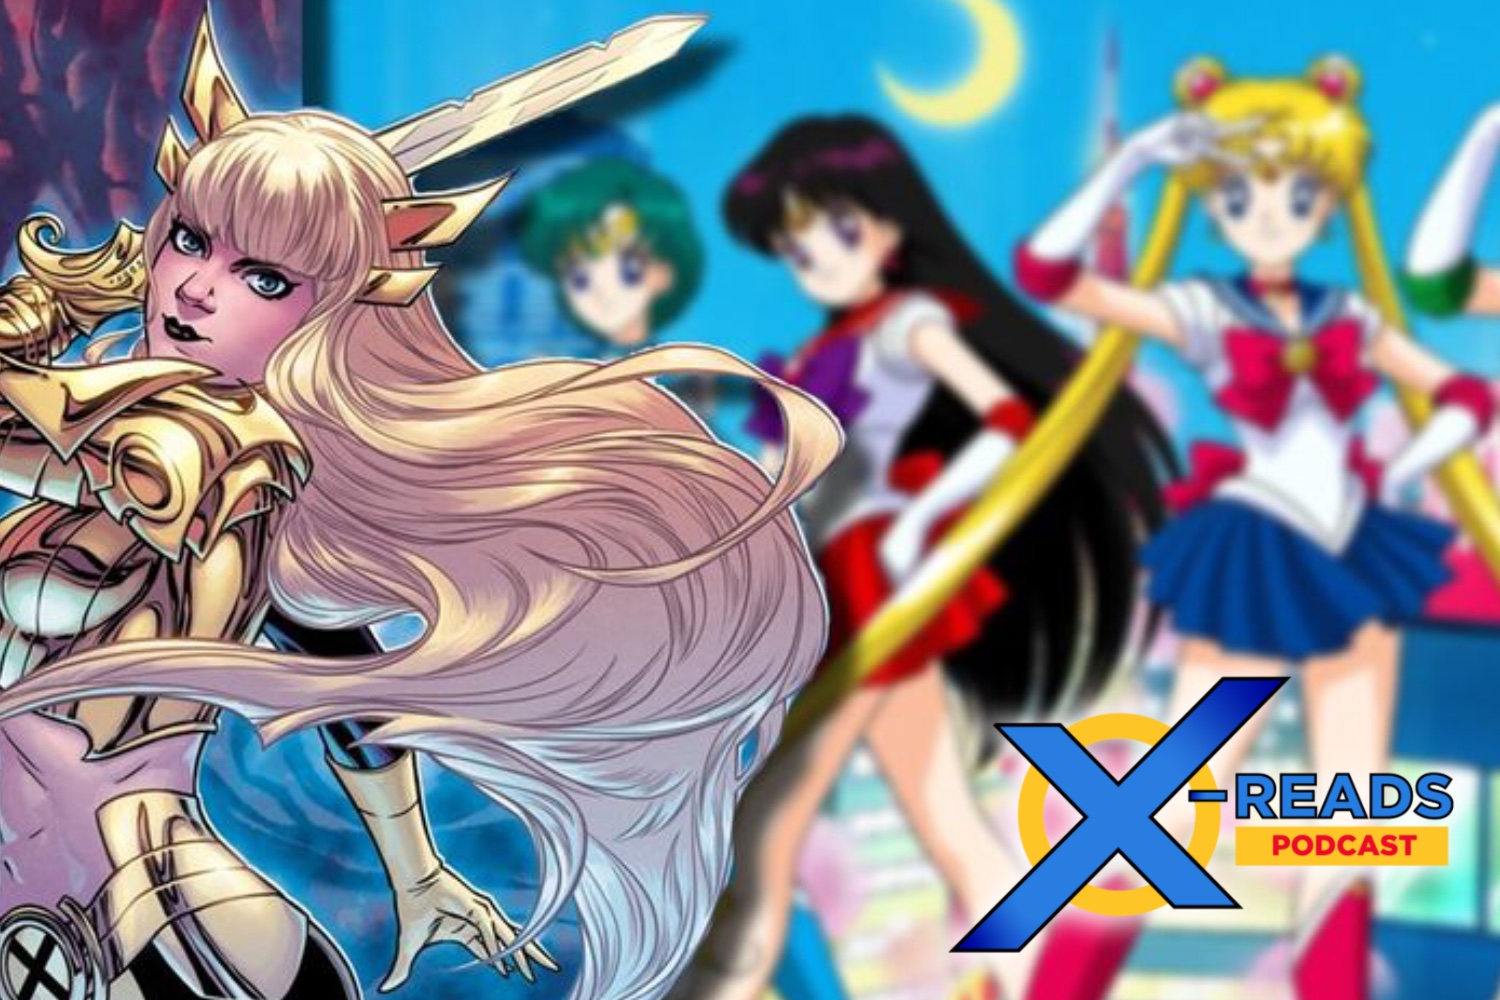 X-Reads Podcast Episode 85: Sailor Moon 30th Anniversary Celebration with Terri Hawkes and Jordan D. White